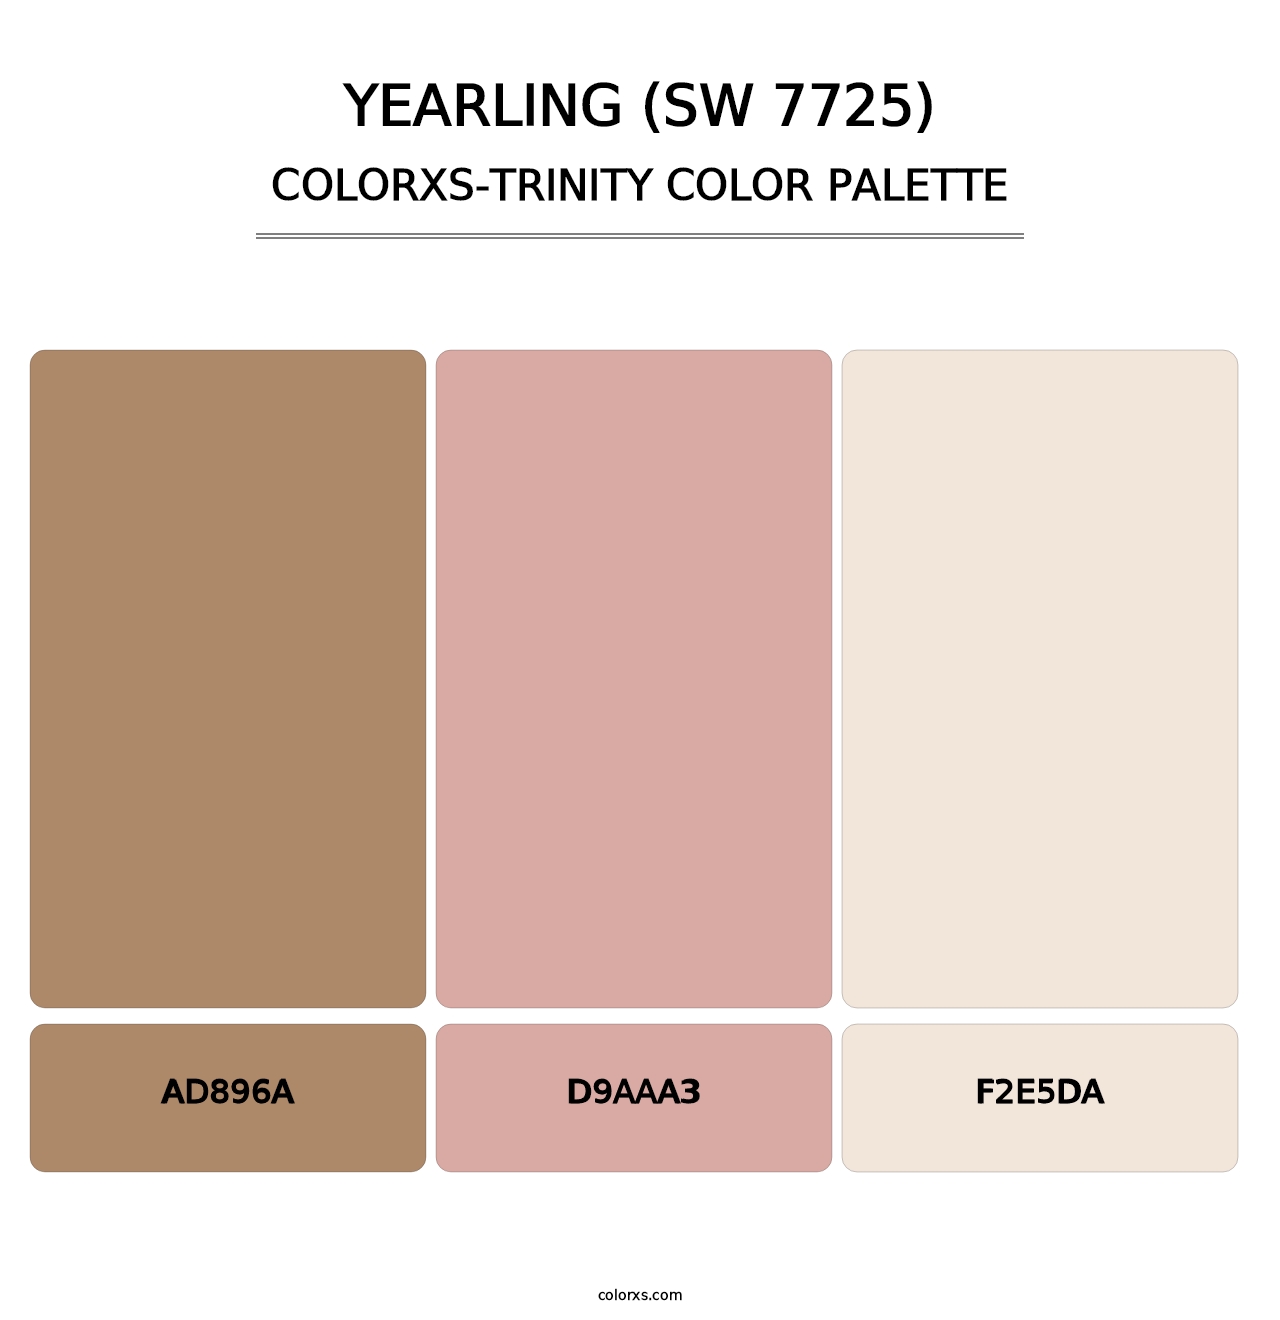 Yearling (SW 7725) - Colorxs Trinity Palette